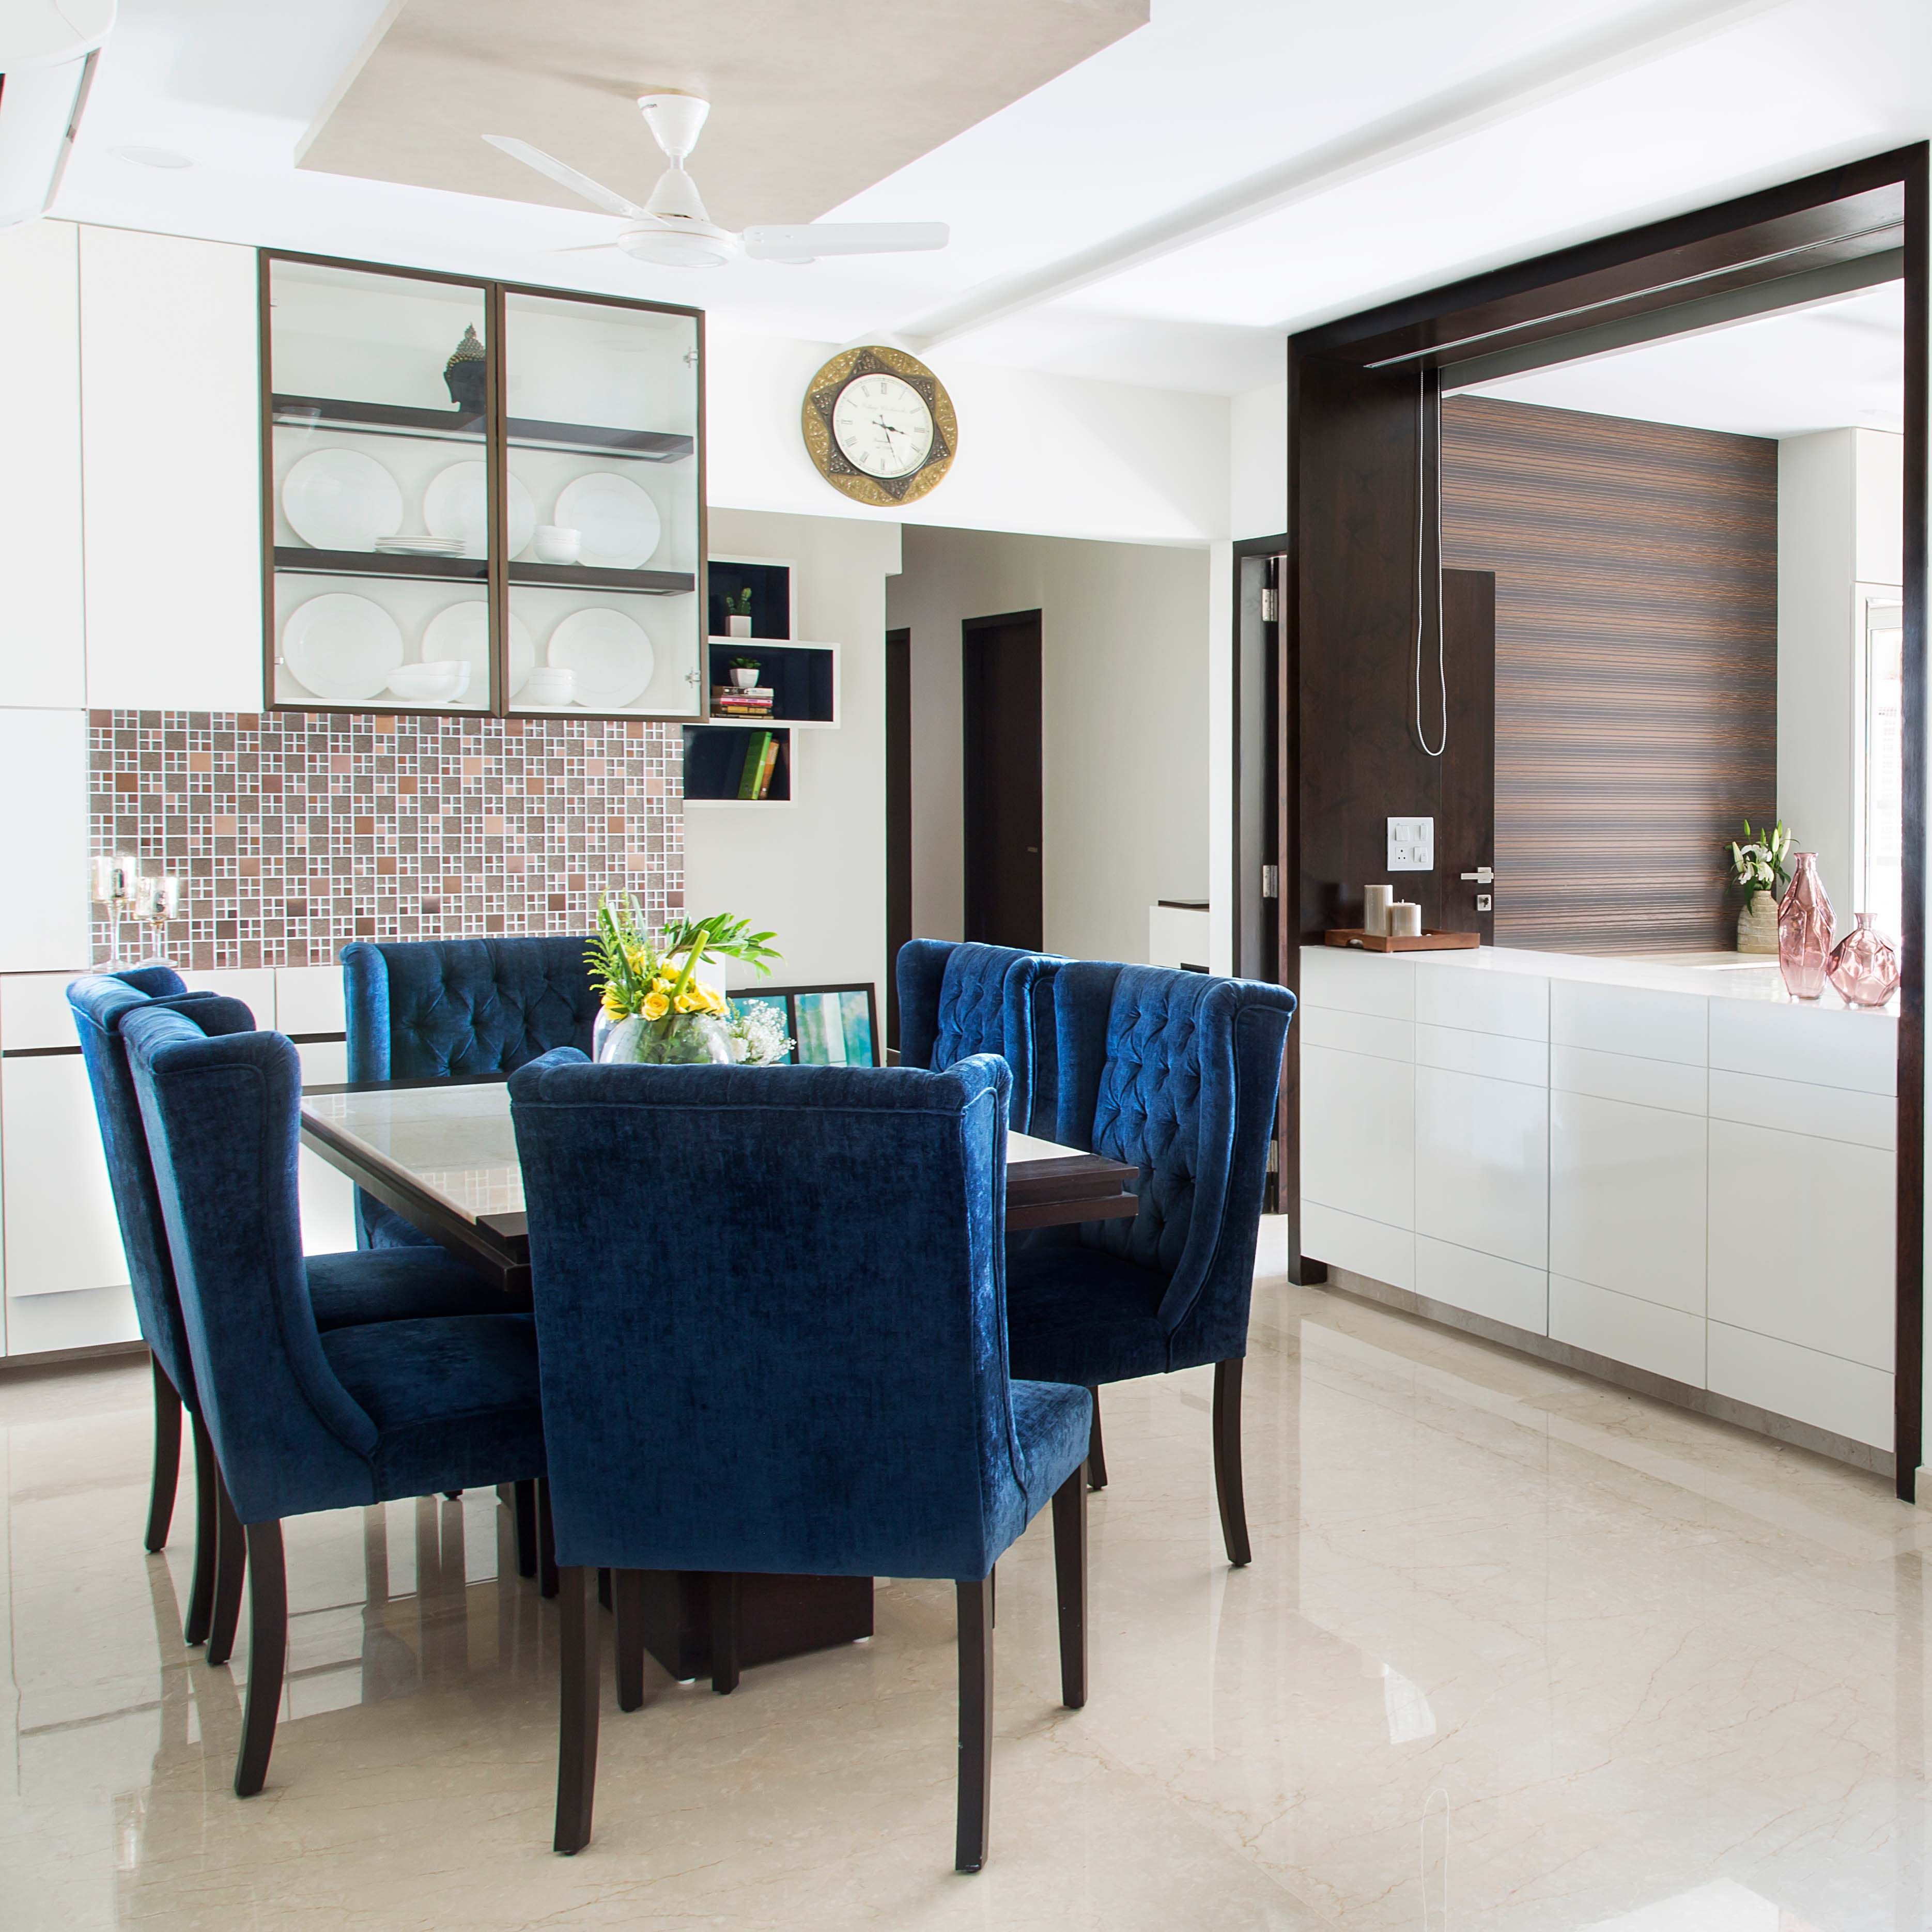 Contemporary 6-Seater White And Dark Blue Dining Room Design With White Crockery Unit